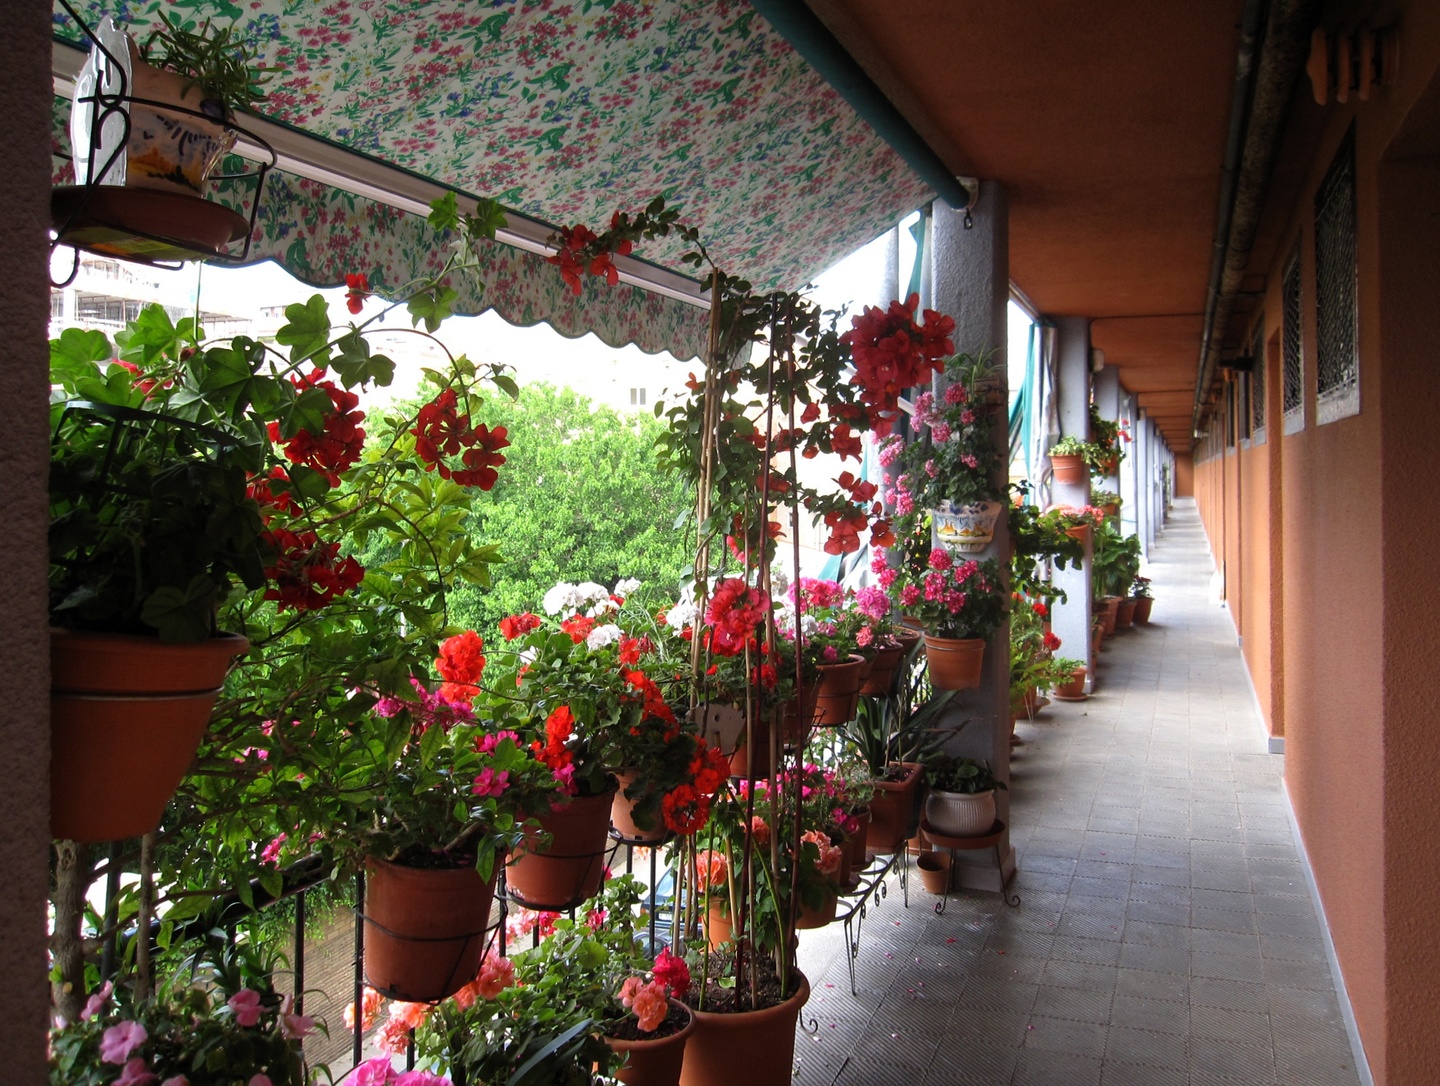 Photo of a covered walkway outside a single-story building; to the left of the walkway are two-level rows of lush plants blooming with red, pink, and white flowers.